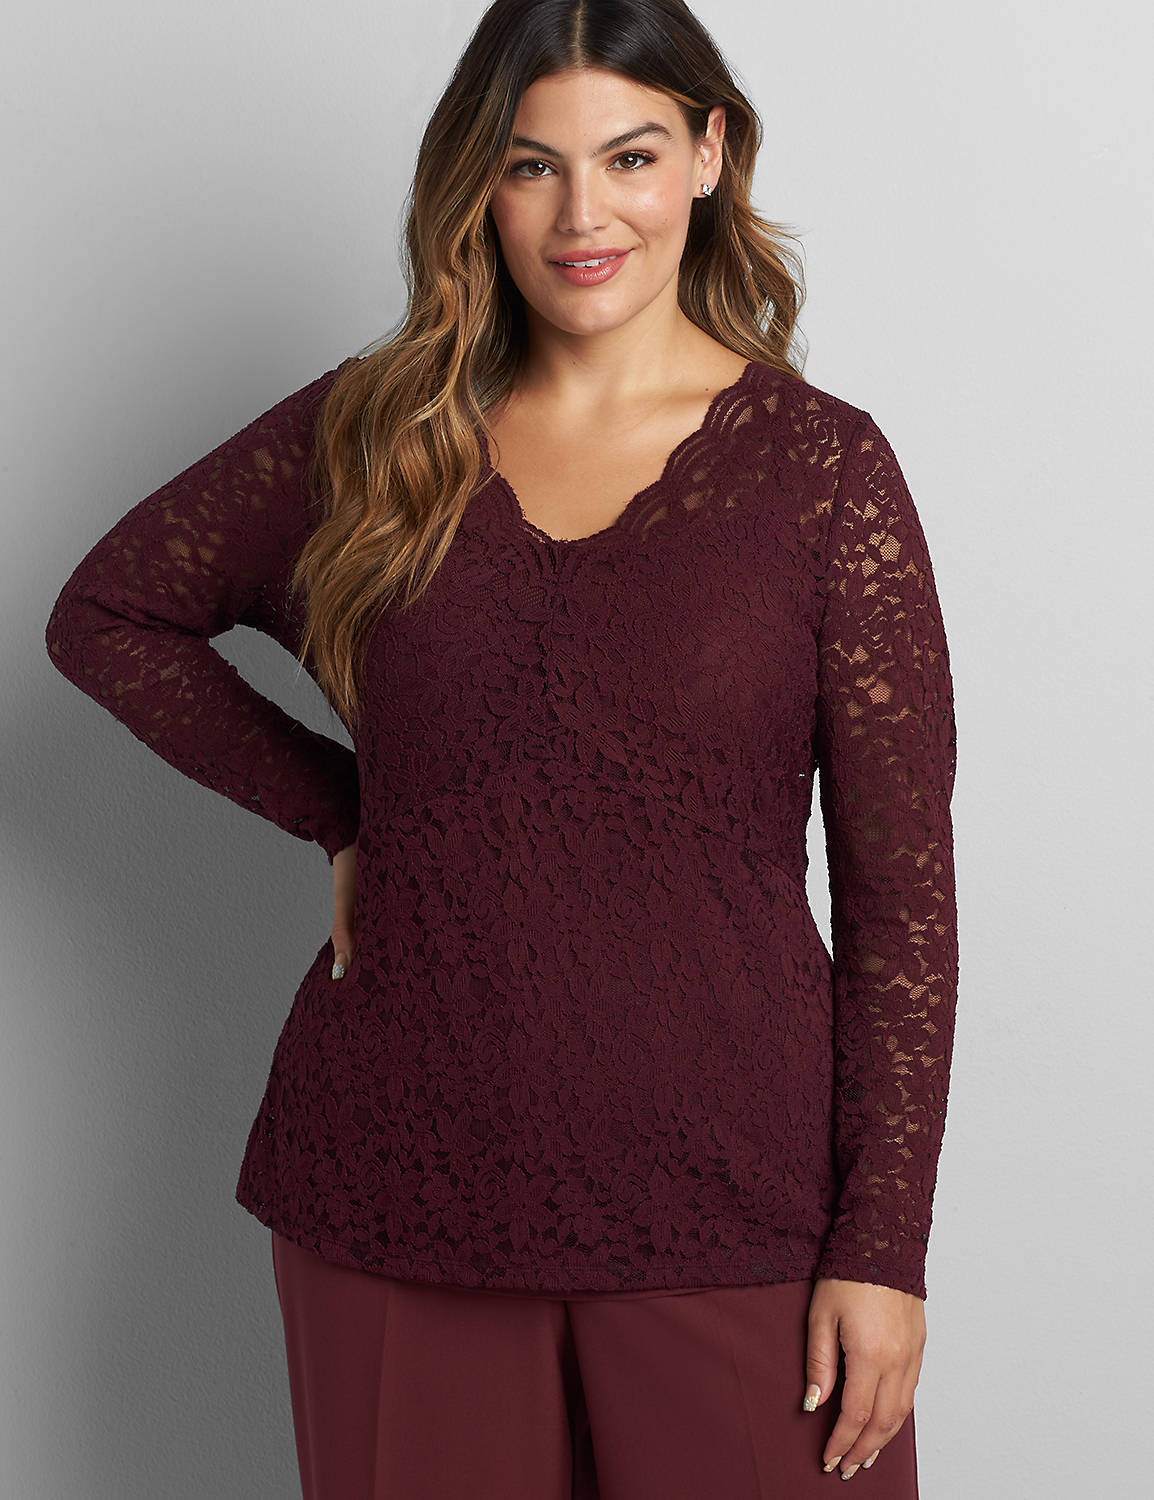 V-Neck Sheer Lace Top Product Image 1